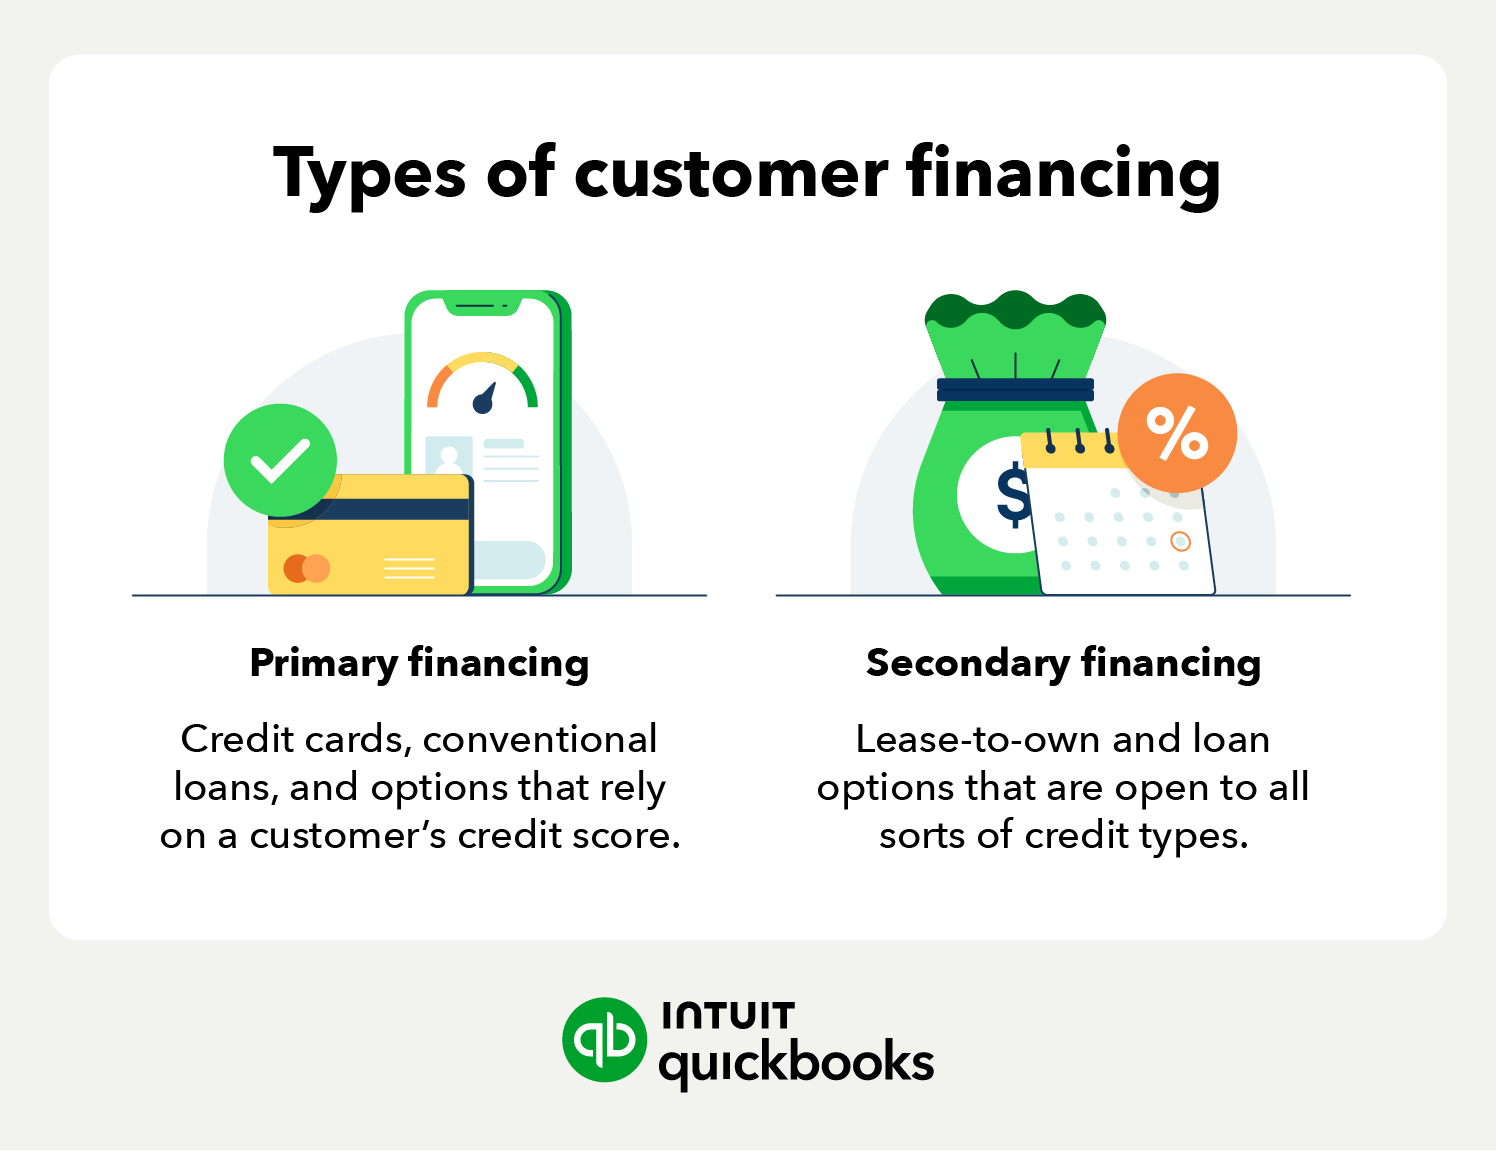 An illustration of the types of customer financing: primary financing includes credit cards and options that rely on a customer's credit score; secondary financing includes options like lease-to-own and others that are open to all sorts of credit types.